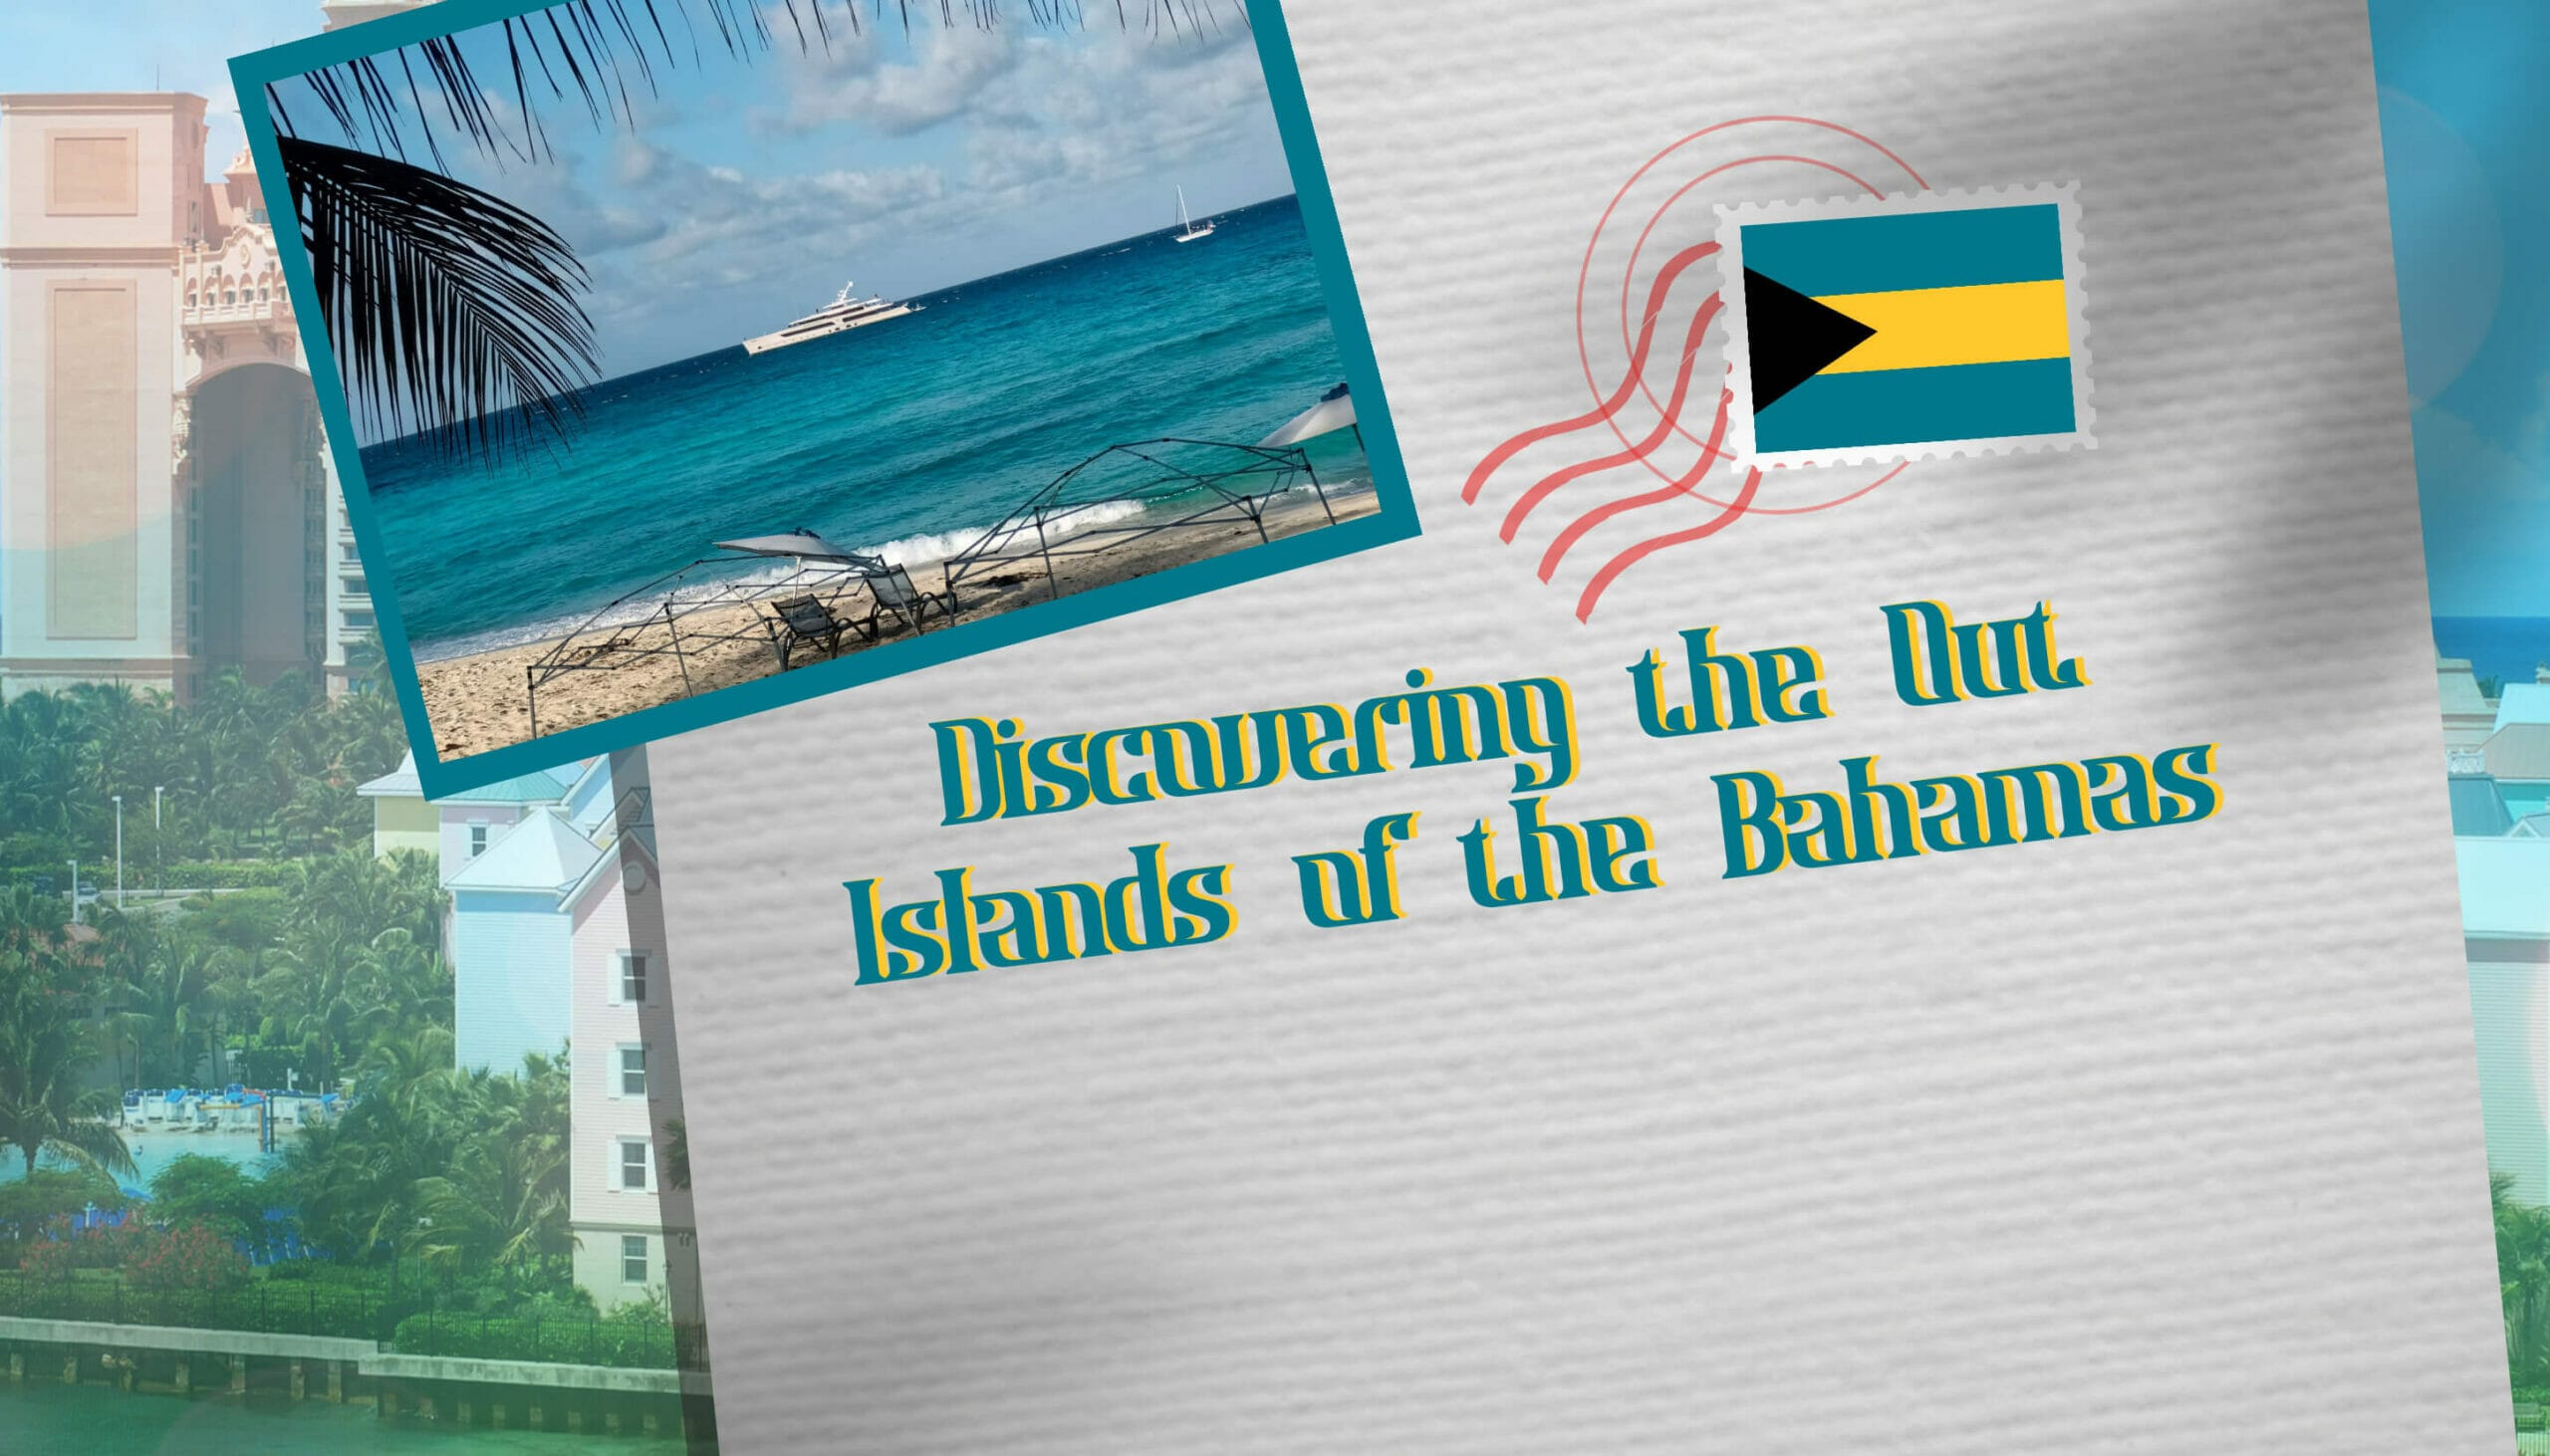 Discovering the Out Islands of the Bahamas